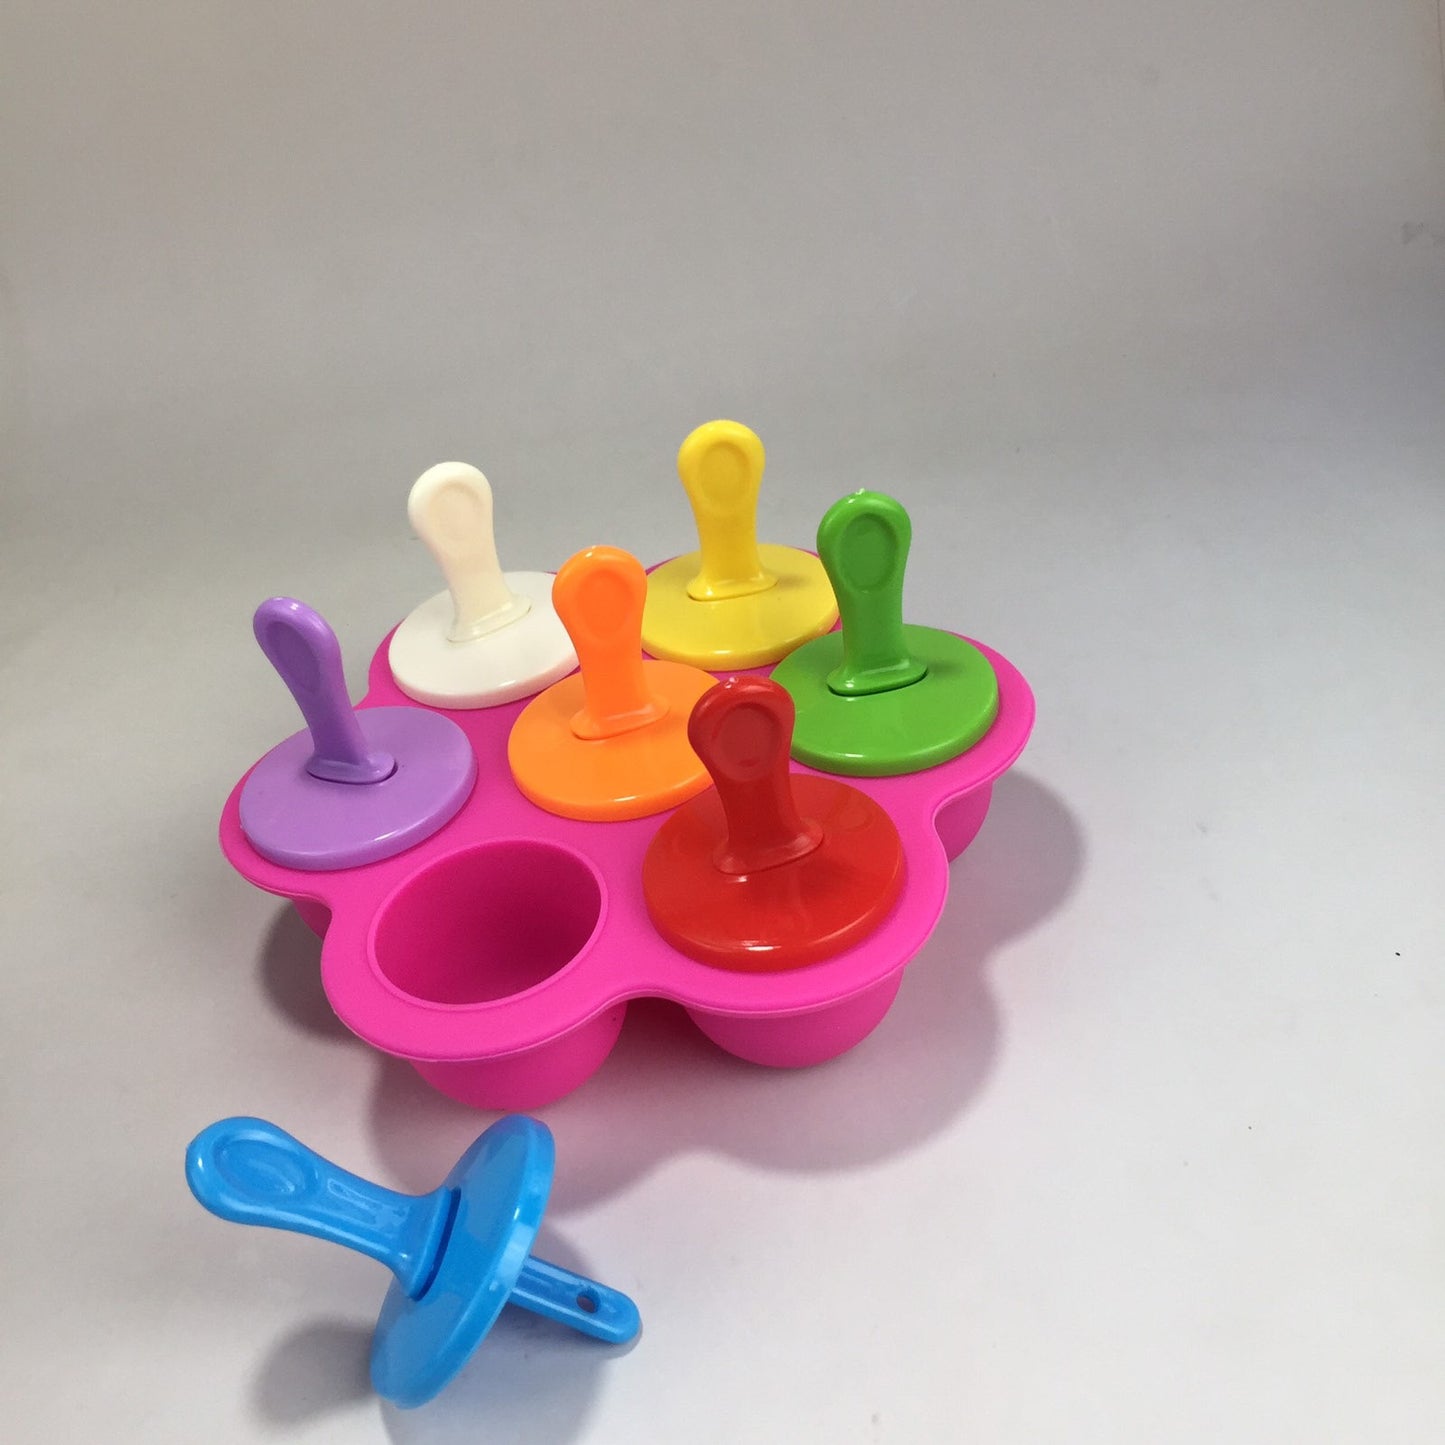 Popsicle Mold or Ice Drop Maker